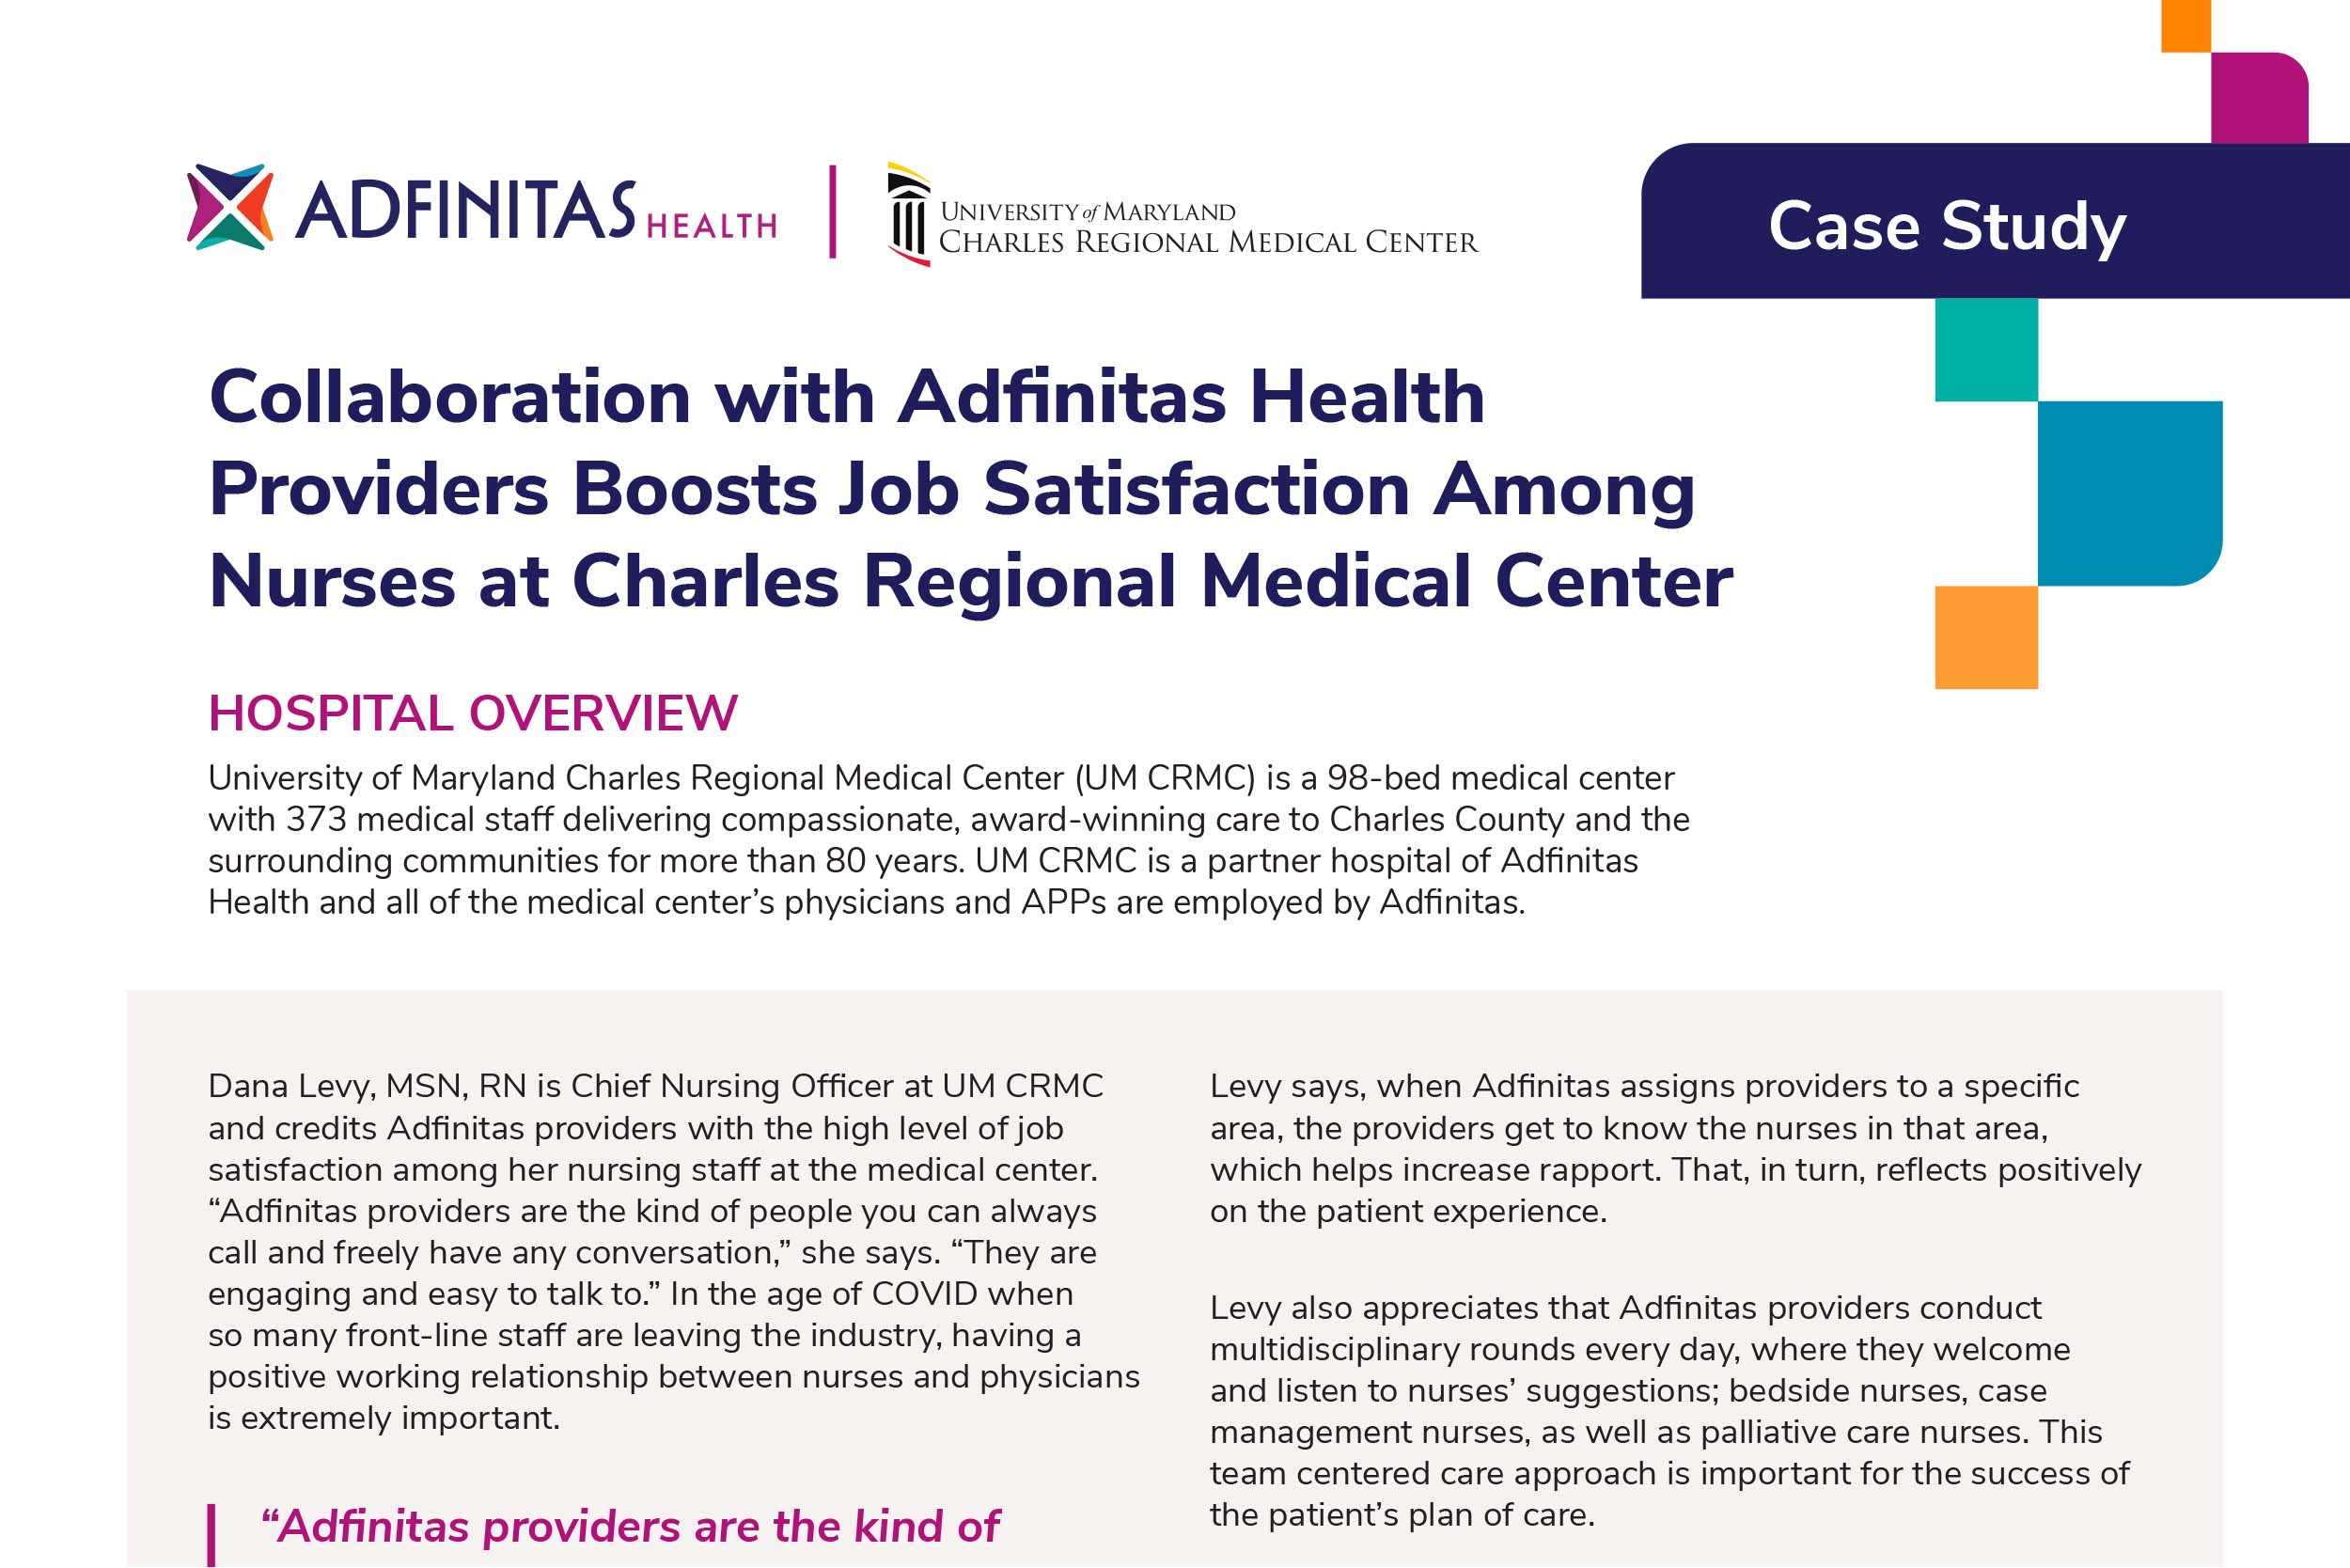 Collaboration with Adfinitas Health Providers Boosts Job Satisfaction Among Nurses at Charles Regional Medical Center